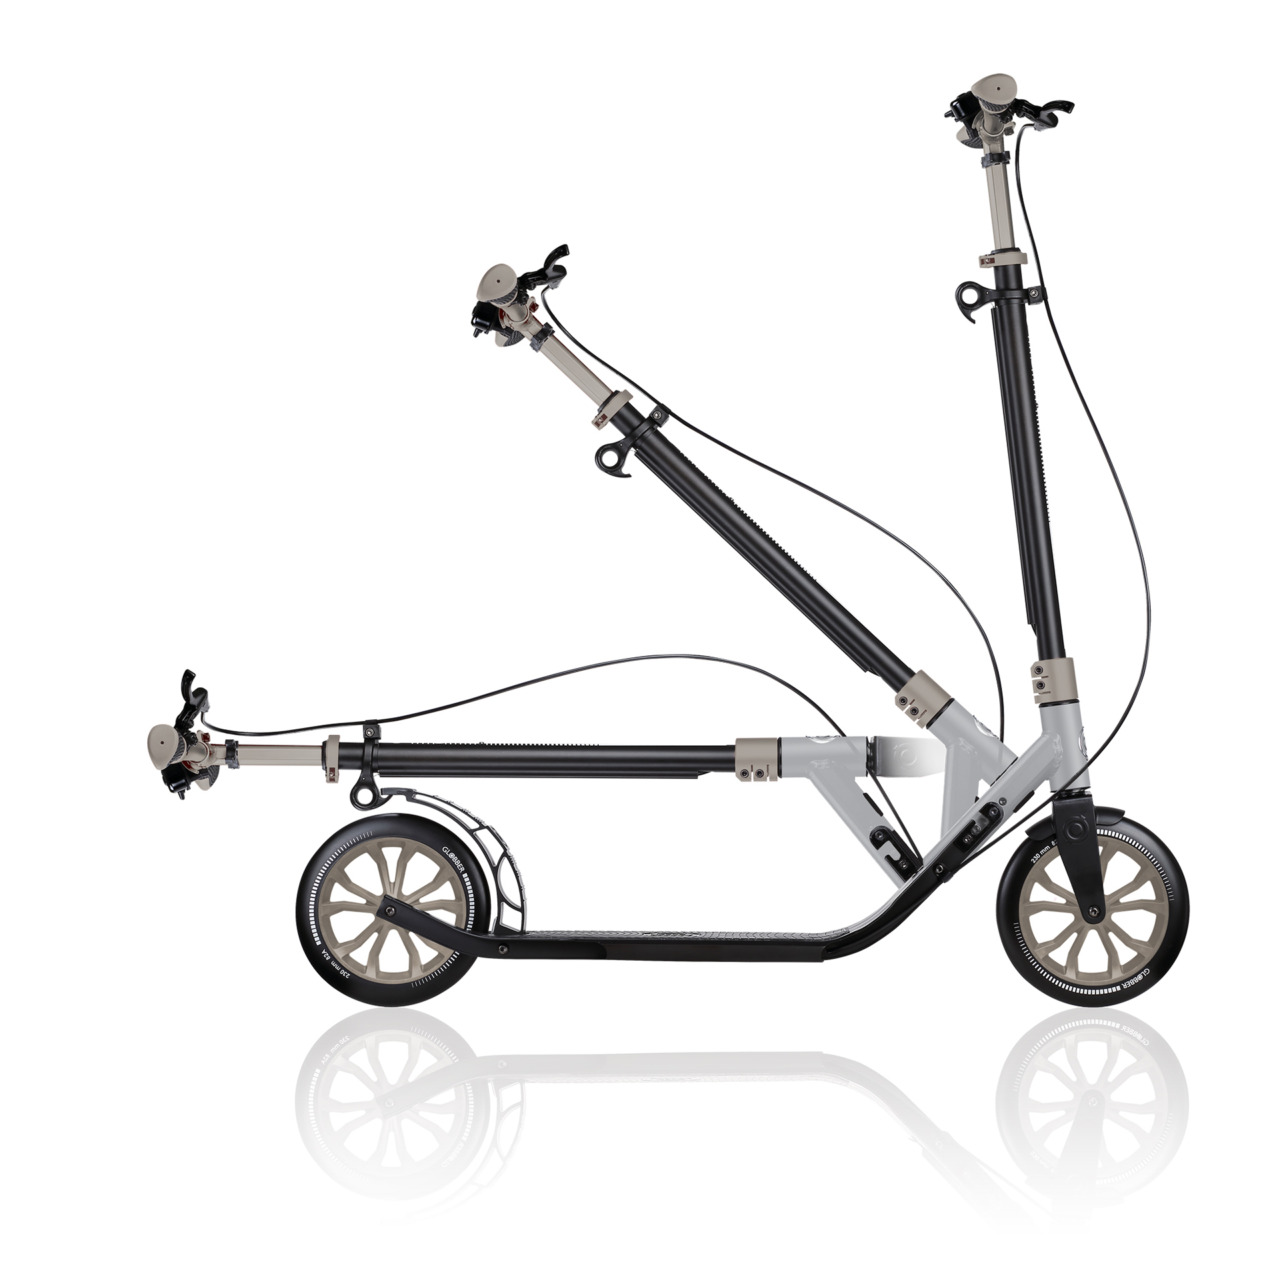 479 102 Foldable Scooter With Big Wheels